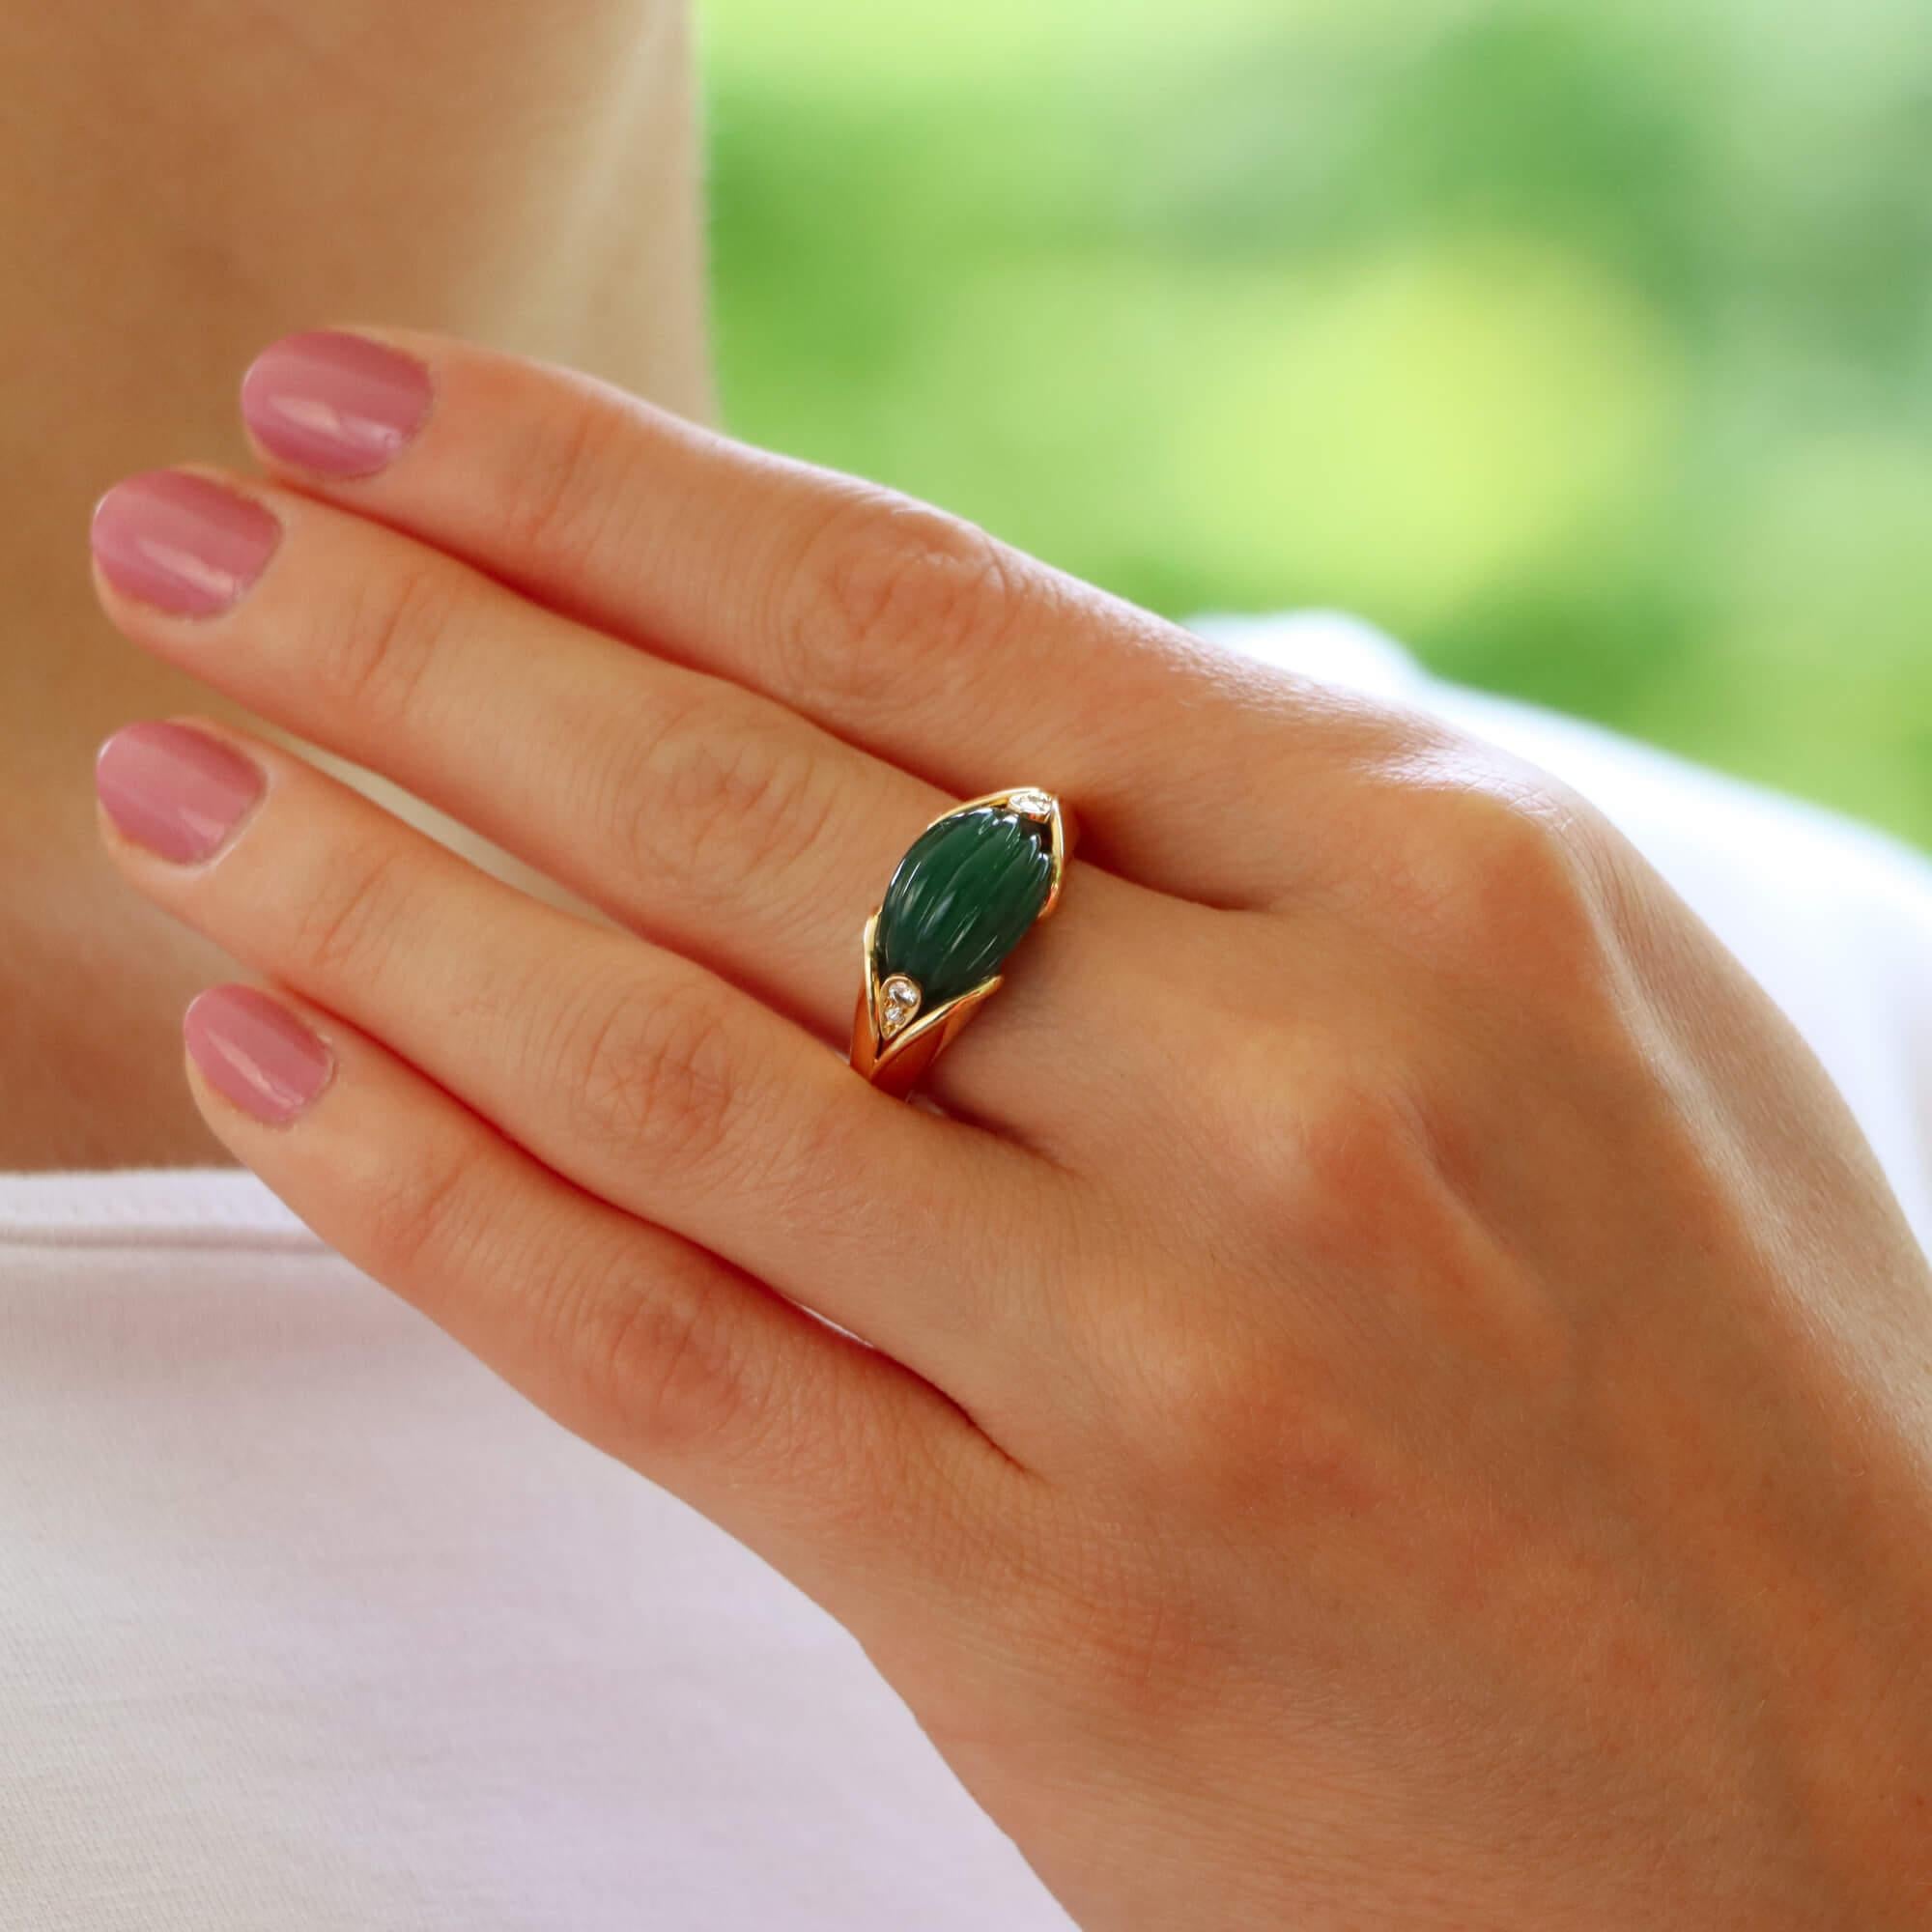 A beautiful vintage Van Cleef and Arpels diamond and chrysoprase dress ring set in 18k yellow gold.

The ring centrally features a deep green chrysoprase stone which has been beautifully hand carved in a fluted ridged motif. The chrysoprase is